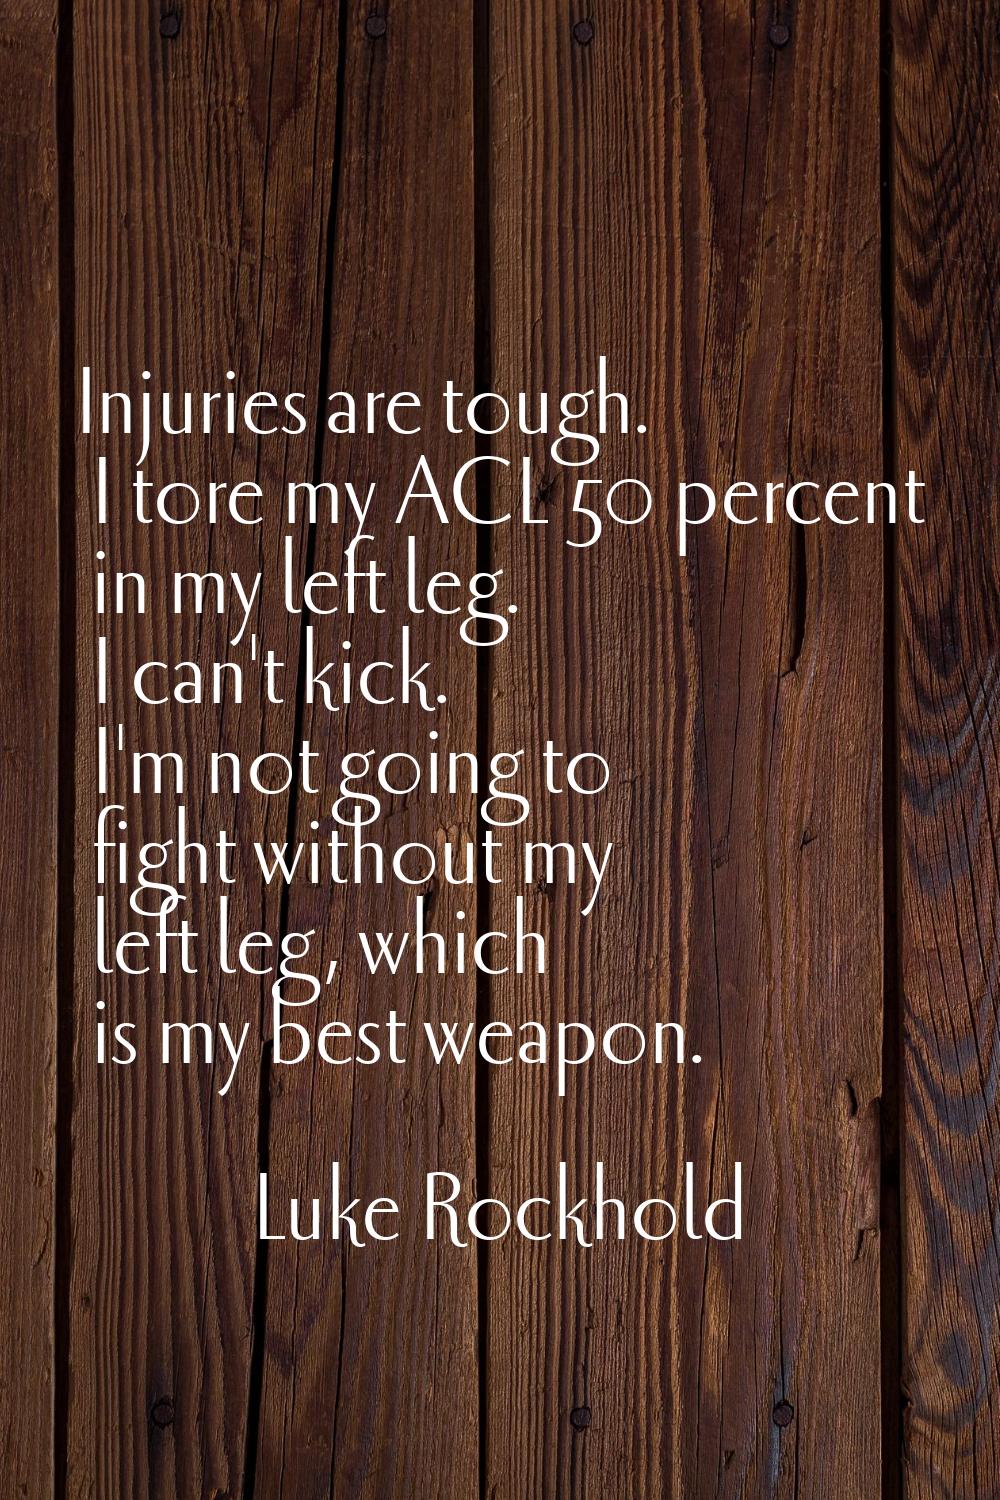 Injuries are tough. I tore my ACL 50 percent in my left leg. I can't kick. I'm not going to fight w